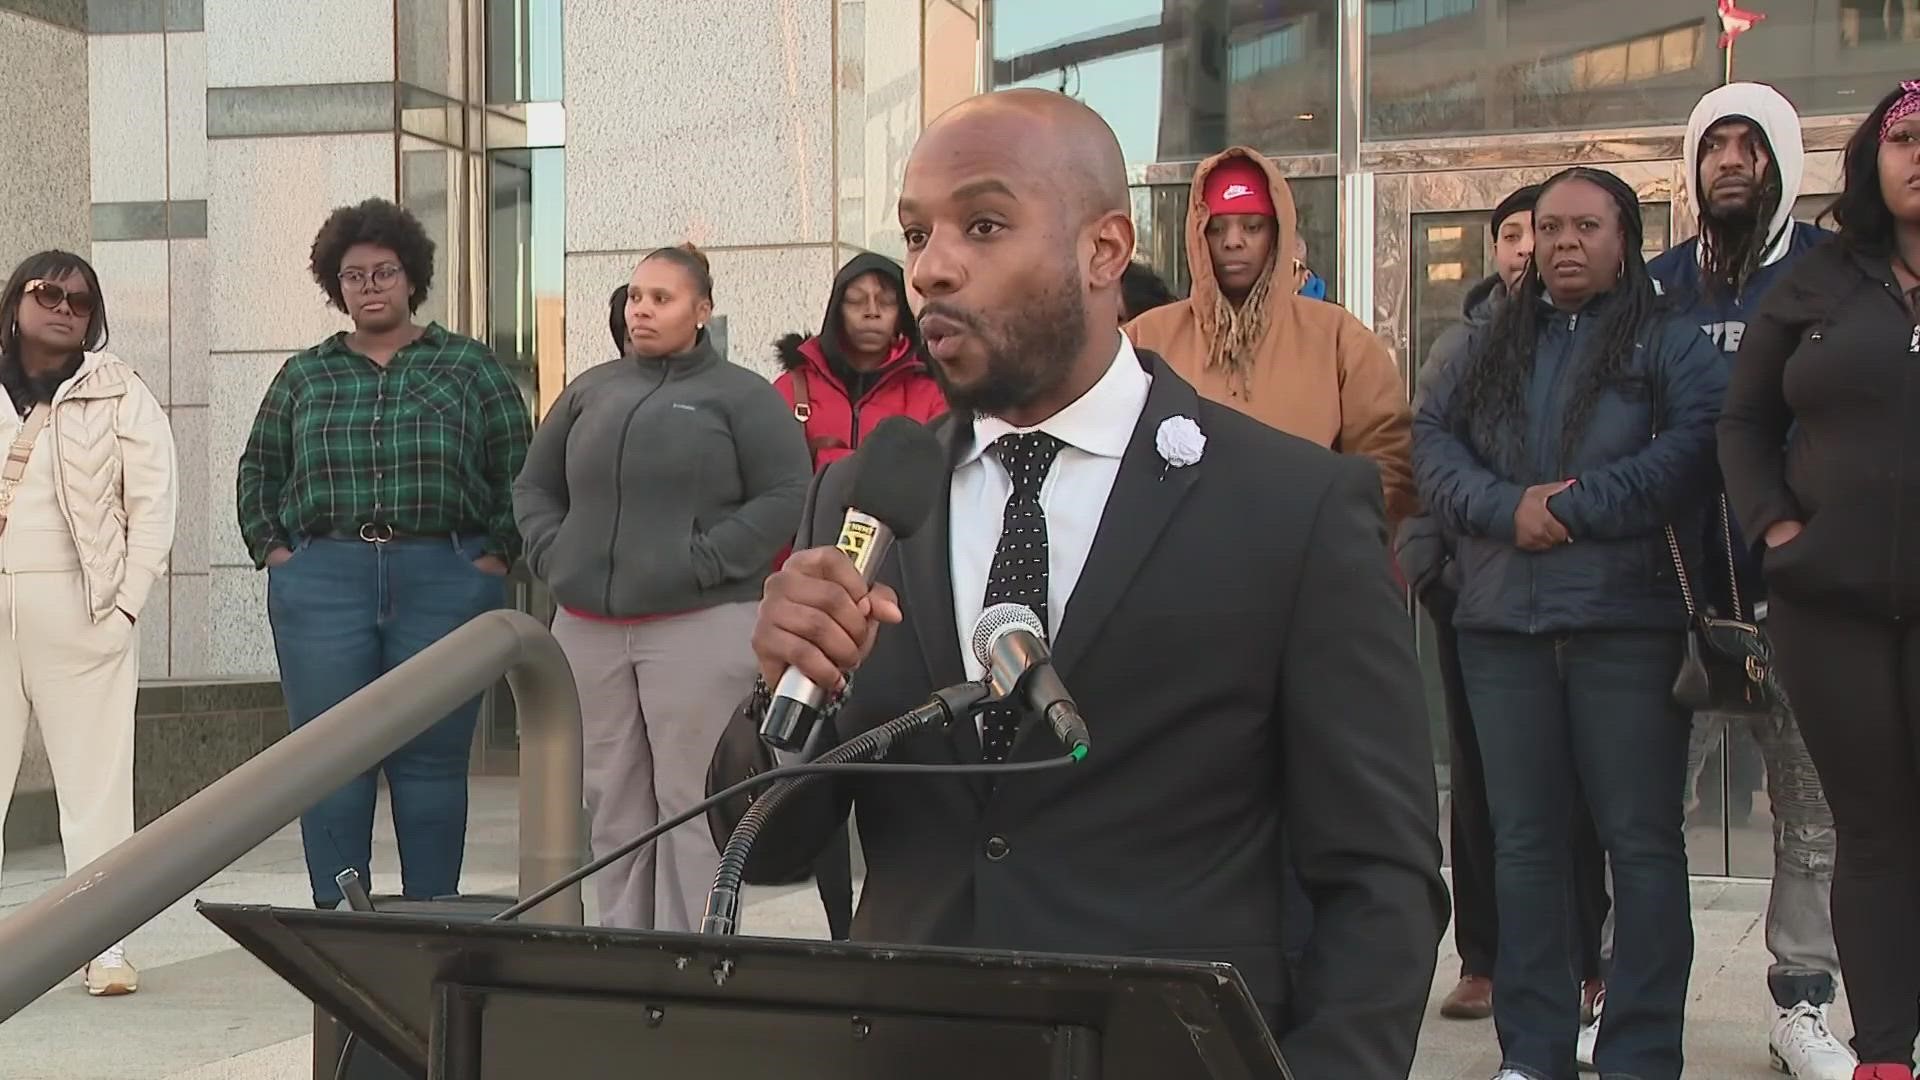 Cleveland's attorney said he may never walk again after he was shot in the back on Feb. 5th by officer Joshua Ohlinger.